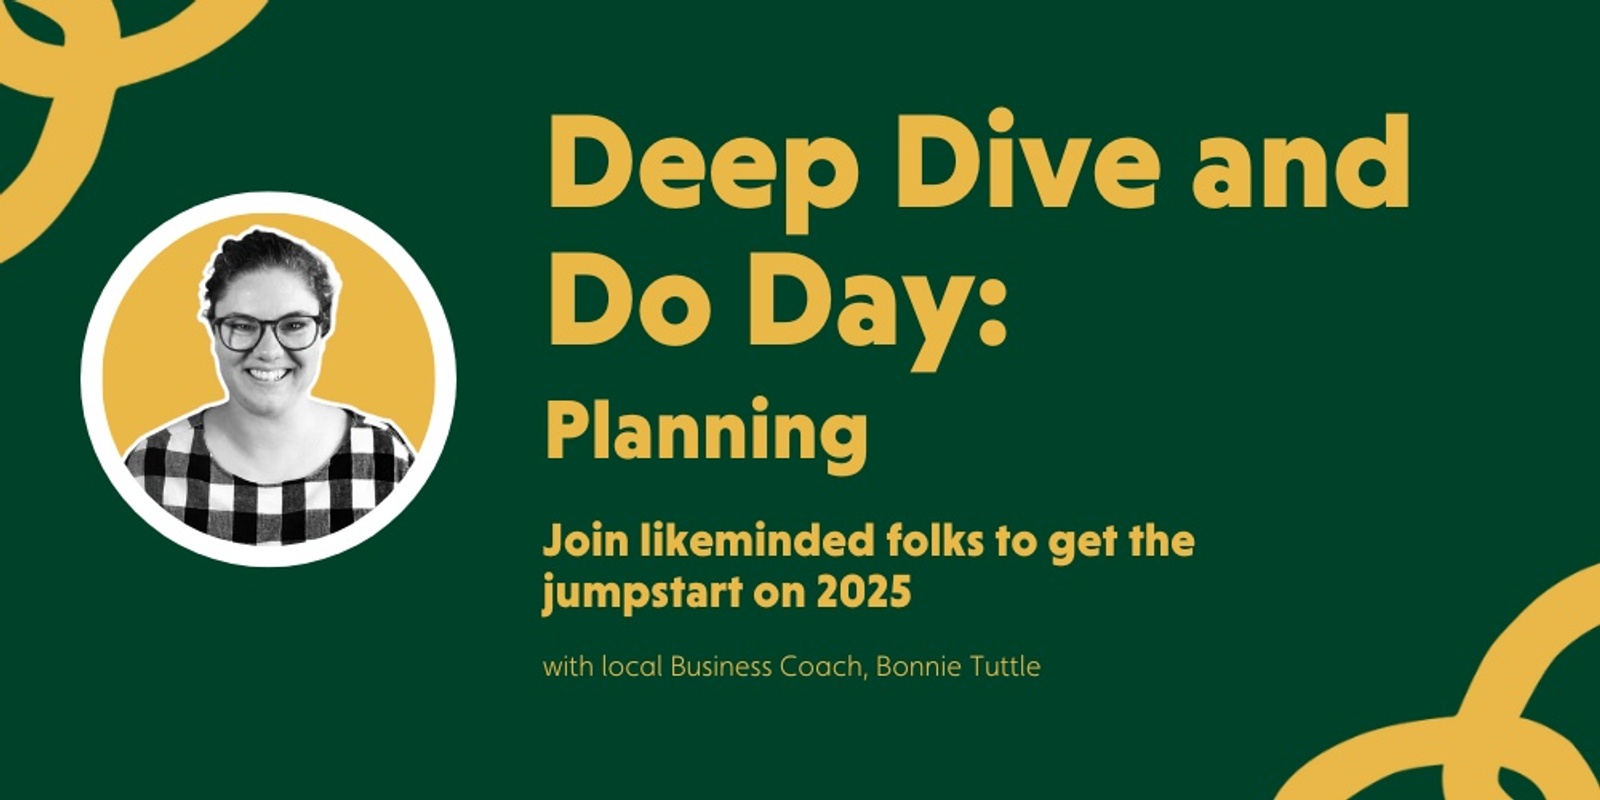 Banner image for Deep Dive and Do Day - Planning